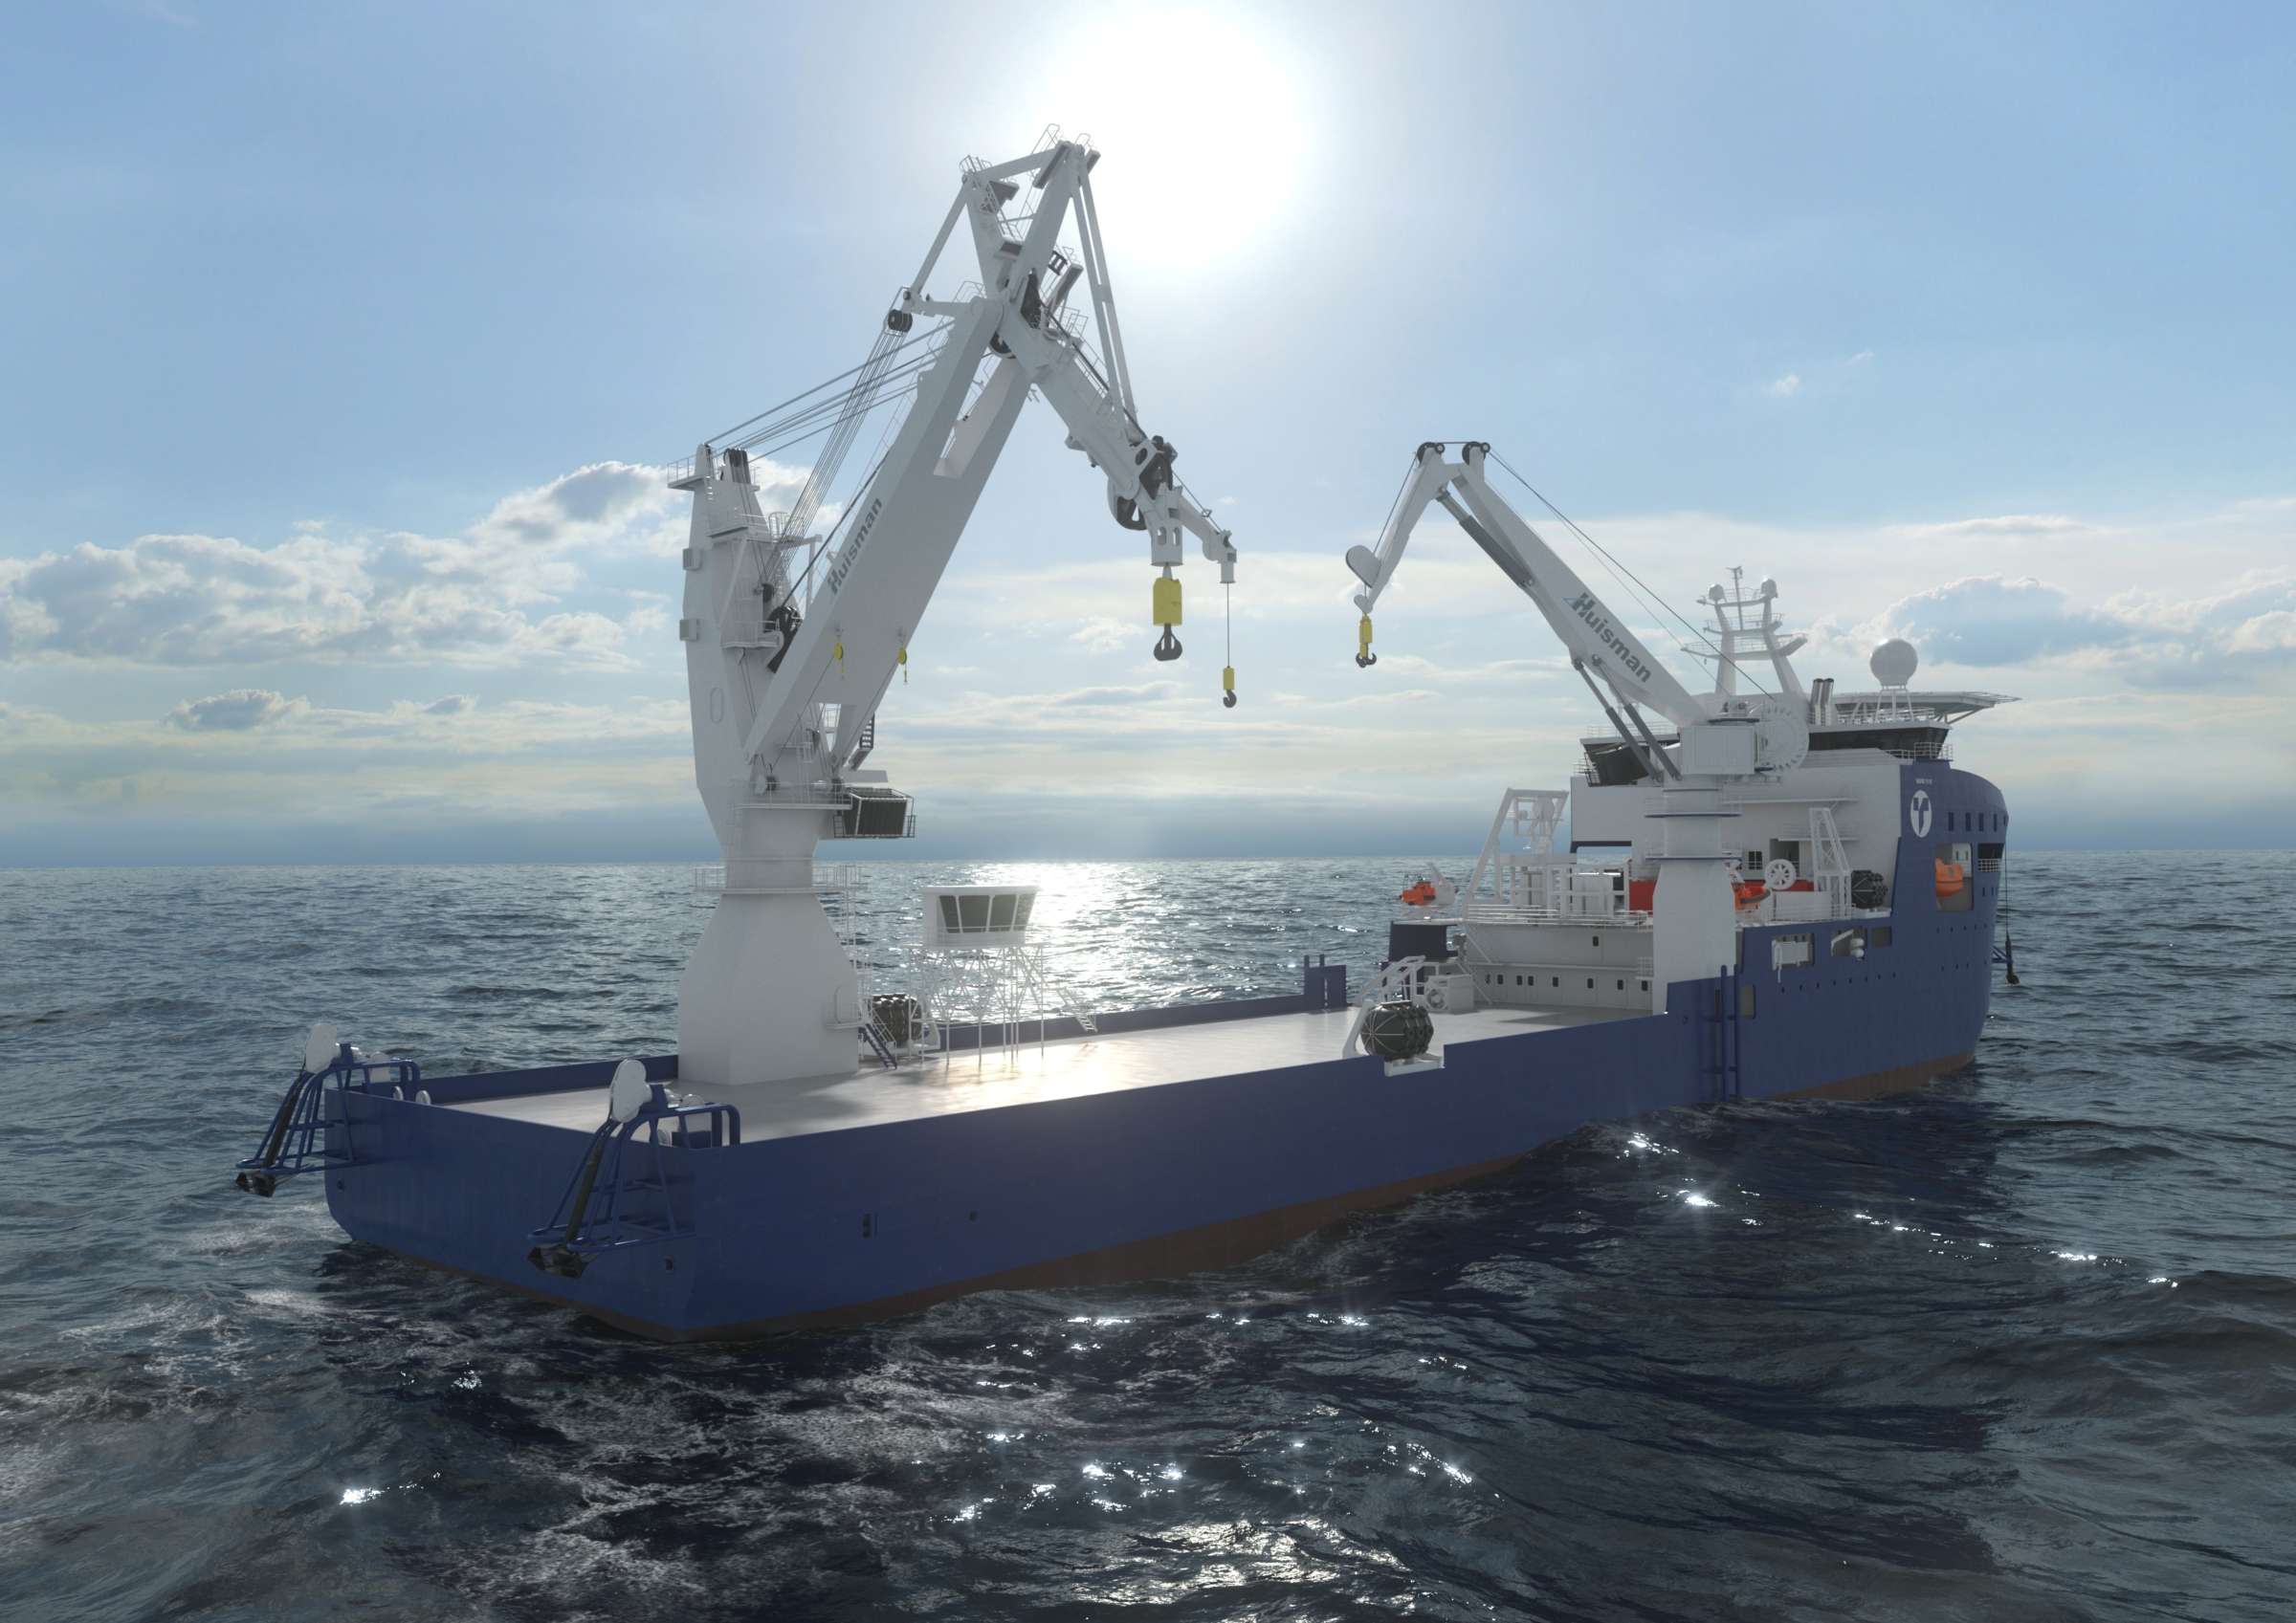 Huisman to deliver two subsea cranes for Toyo construction’s cable-lay vessel